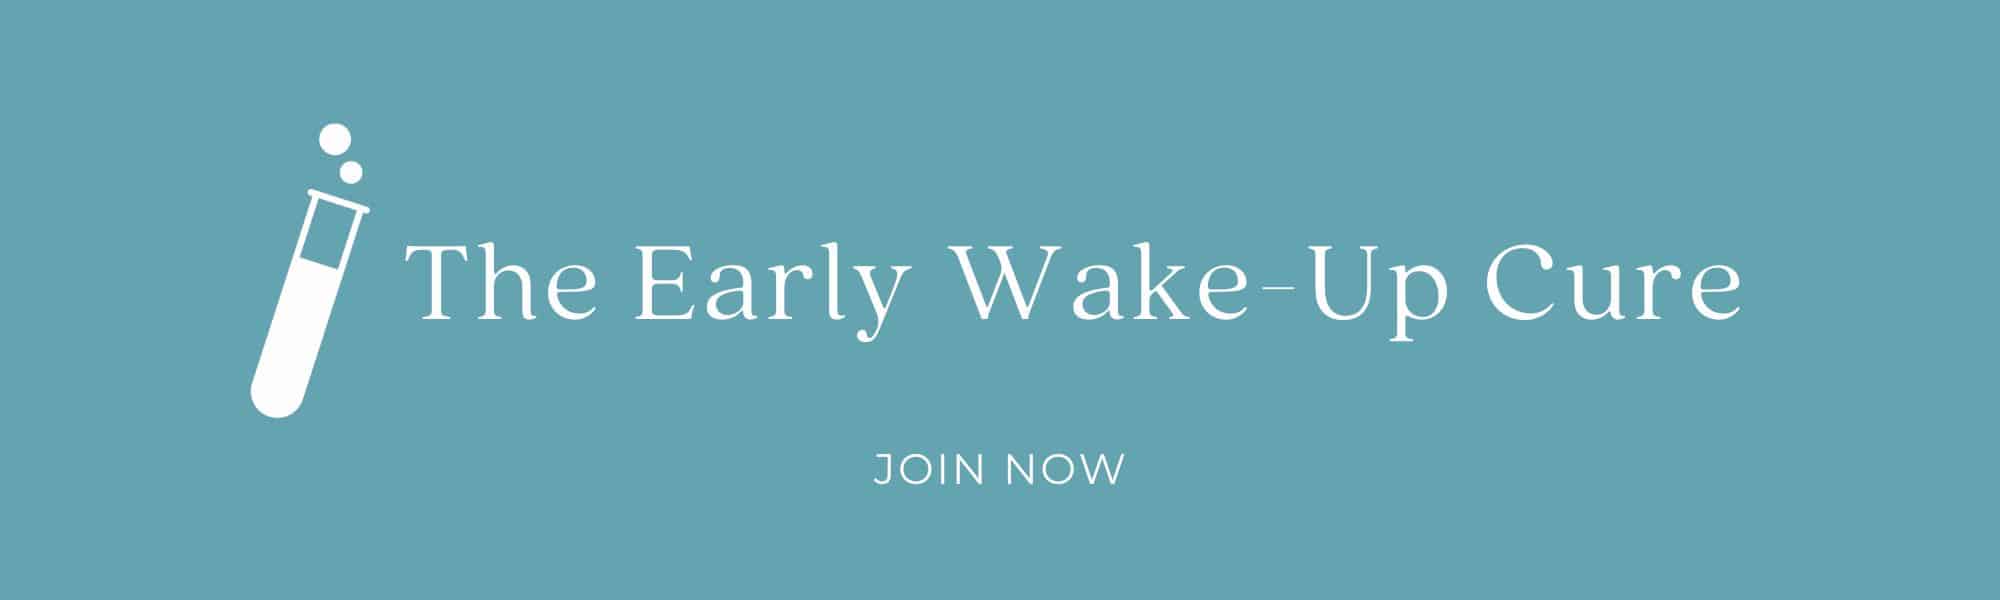 EARLY WAKE UP JOIN NOW BANNER